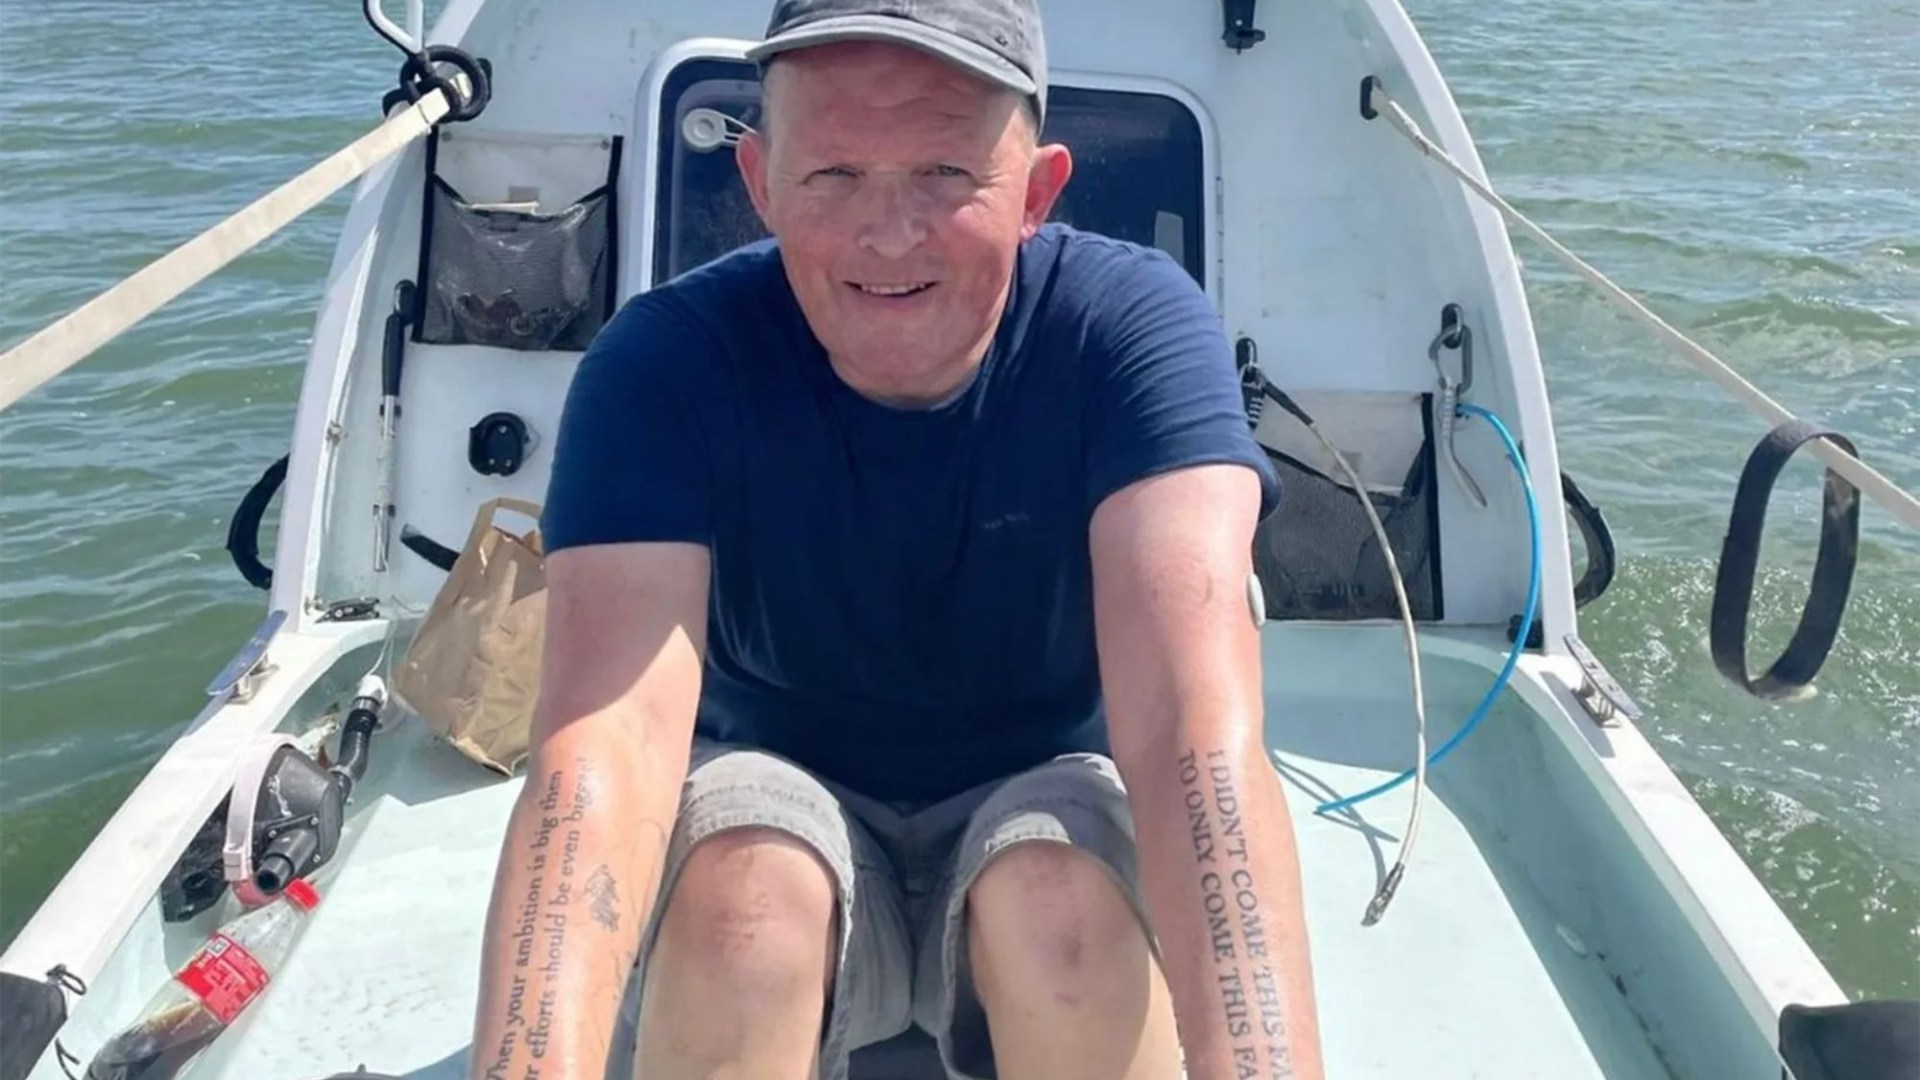 Exclusive: Brit dad’s chilling last words revealed in heartbreaking clip before tragic rowing trip